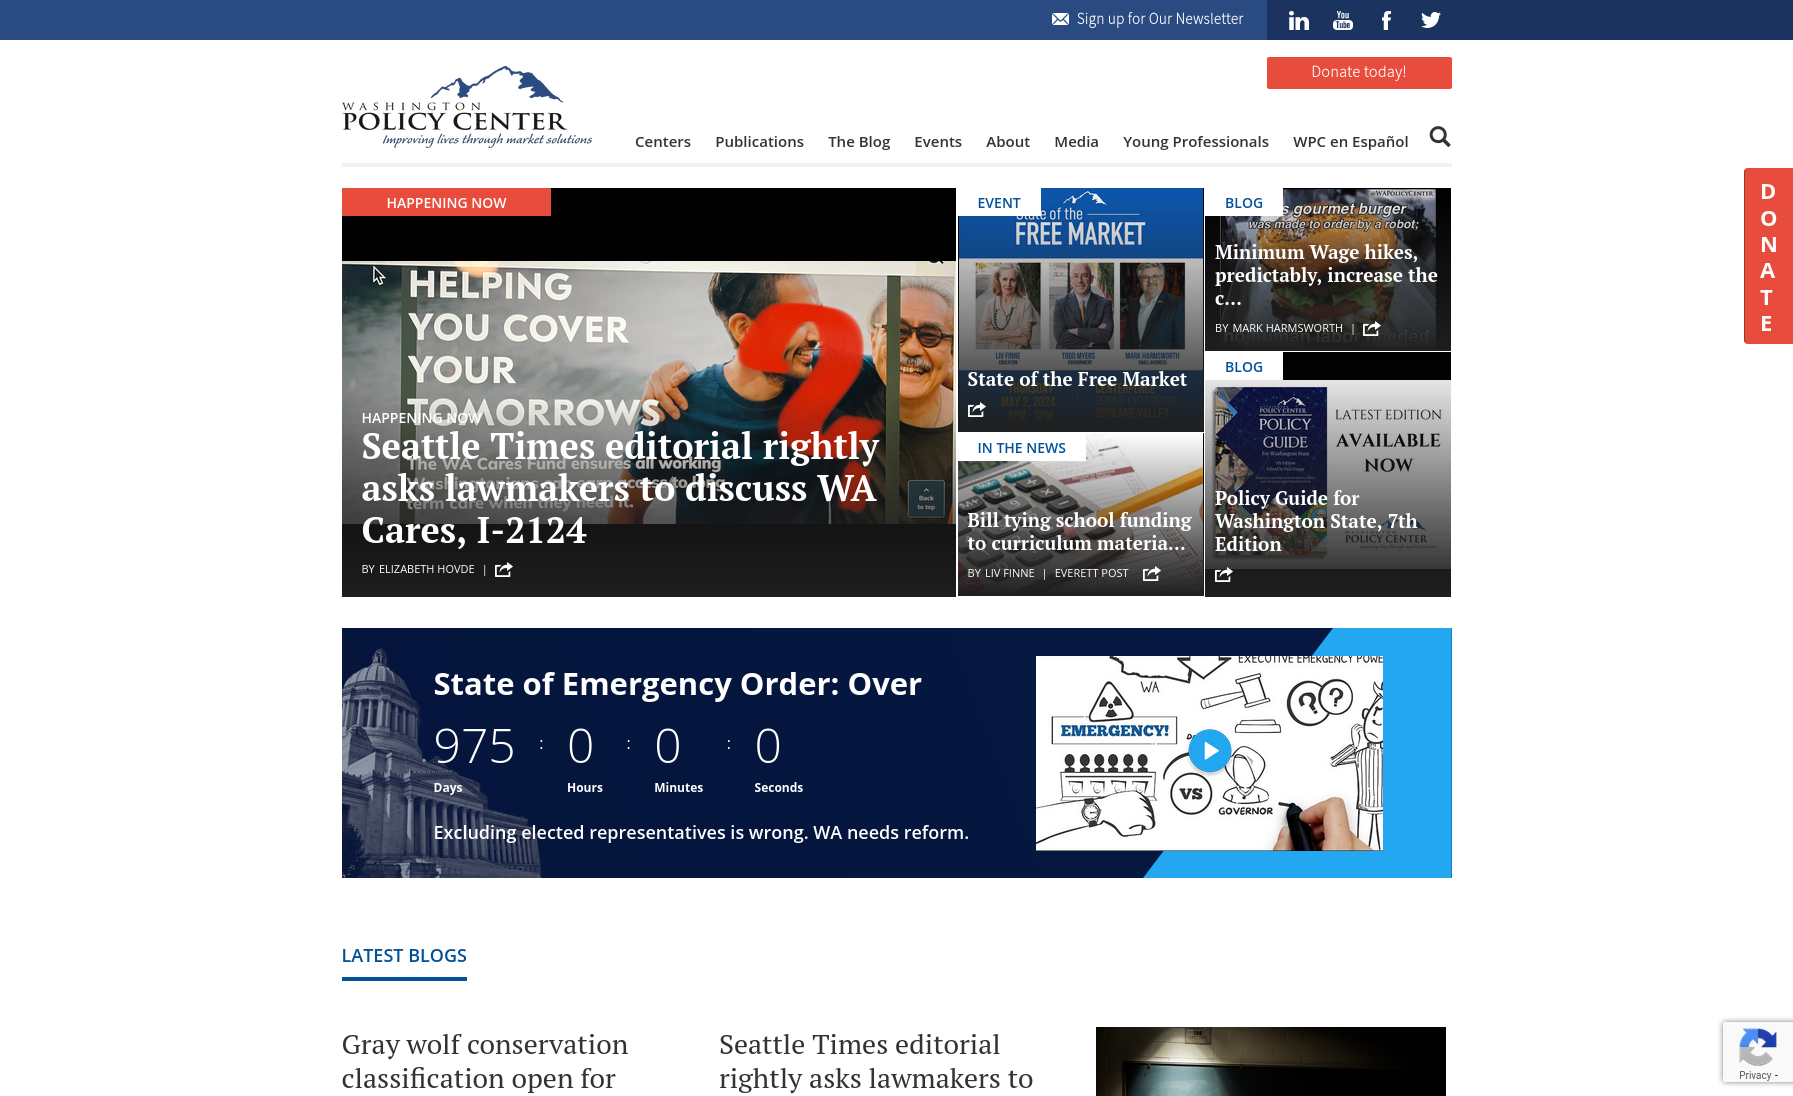 Website of the Washington Policy Center